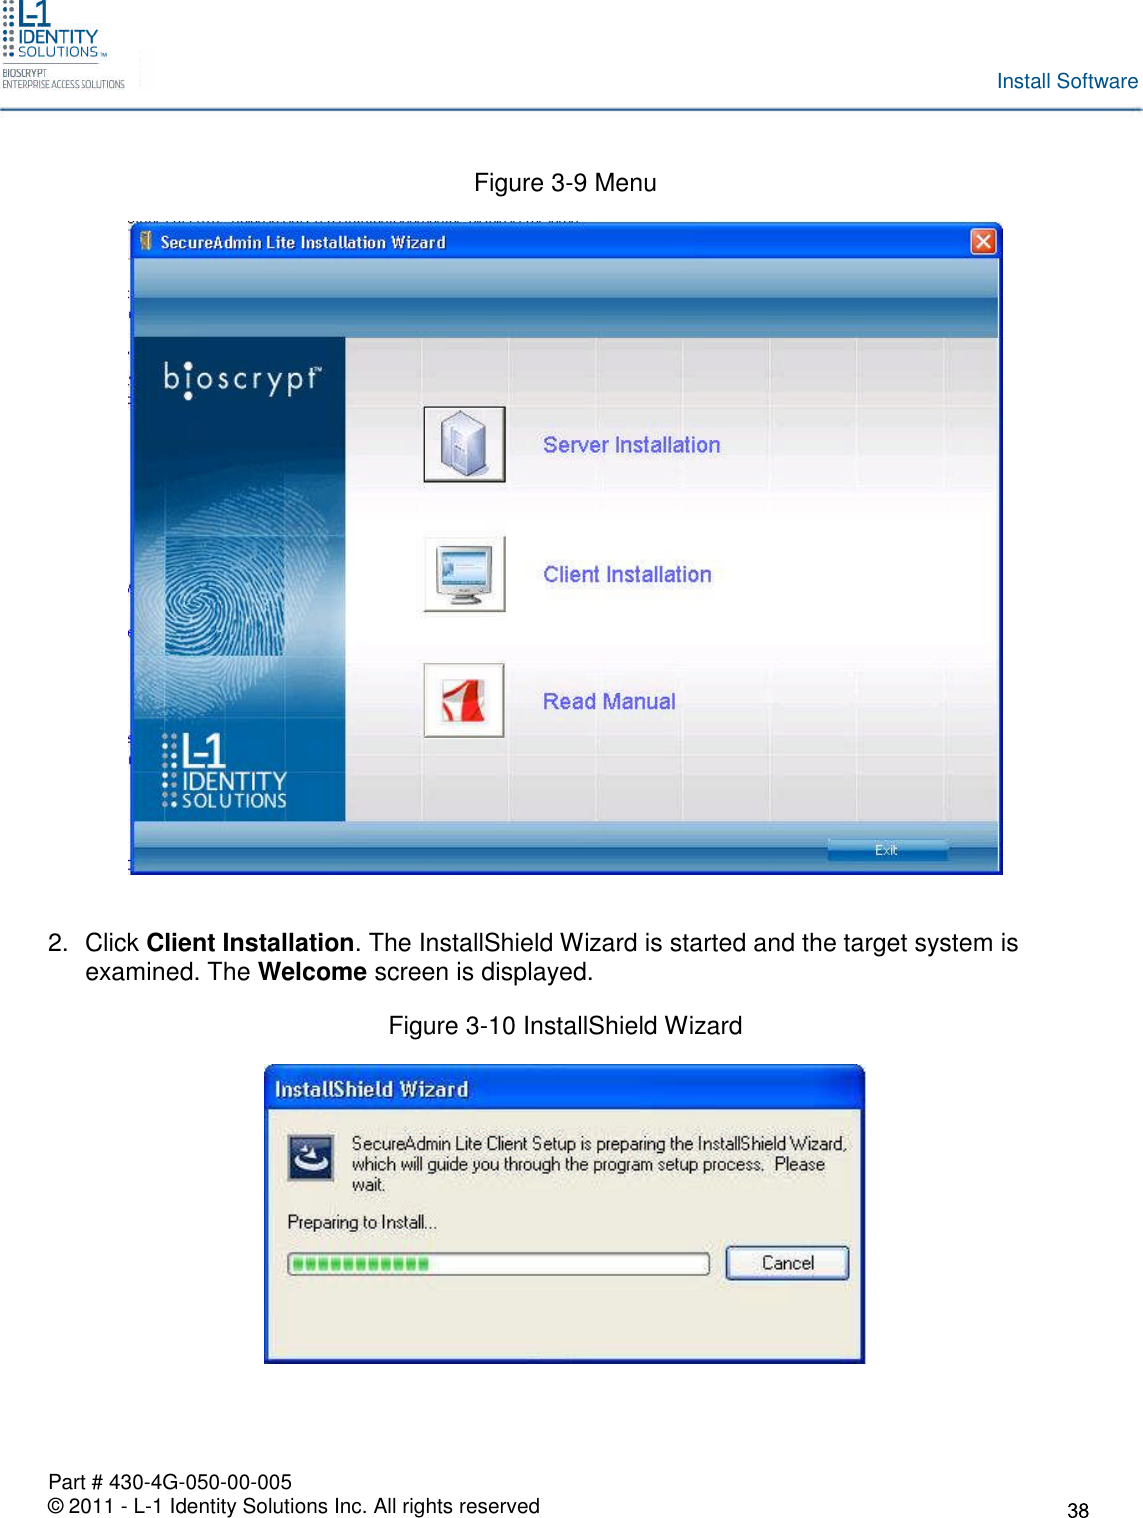 Part # 430-4G-050-00-005© 2011 - L-1 Identity Solutions Inc. All rights reservedInstall SoftwareFigure 3-9 Menu2. Click Client Installation. The InstallShield Wizard is started and the target system isexamined. The Welcome screen is displayed.Figure 3-10 InstallShield Wizard